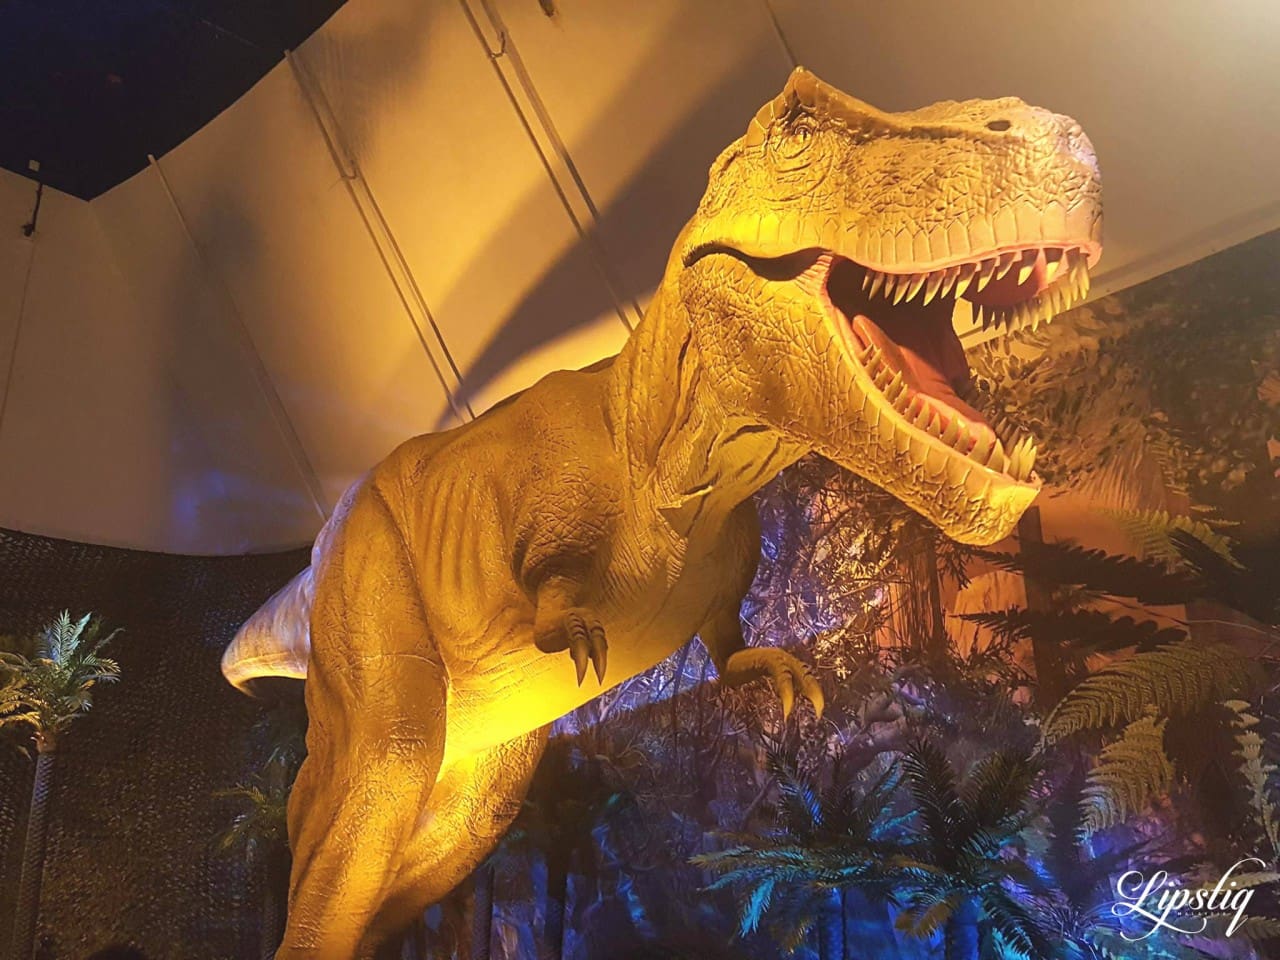 The Living Dinosaurs exhibition at the Macao Science Center